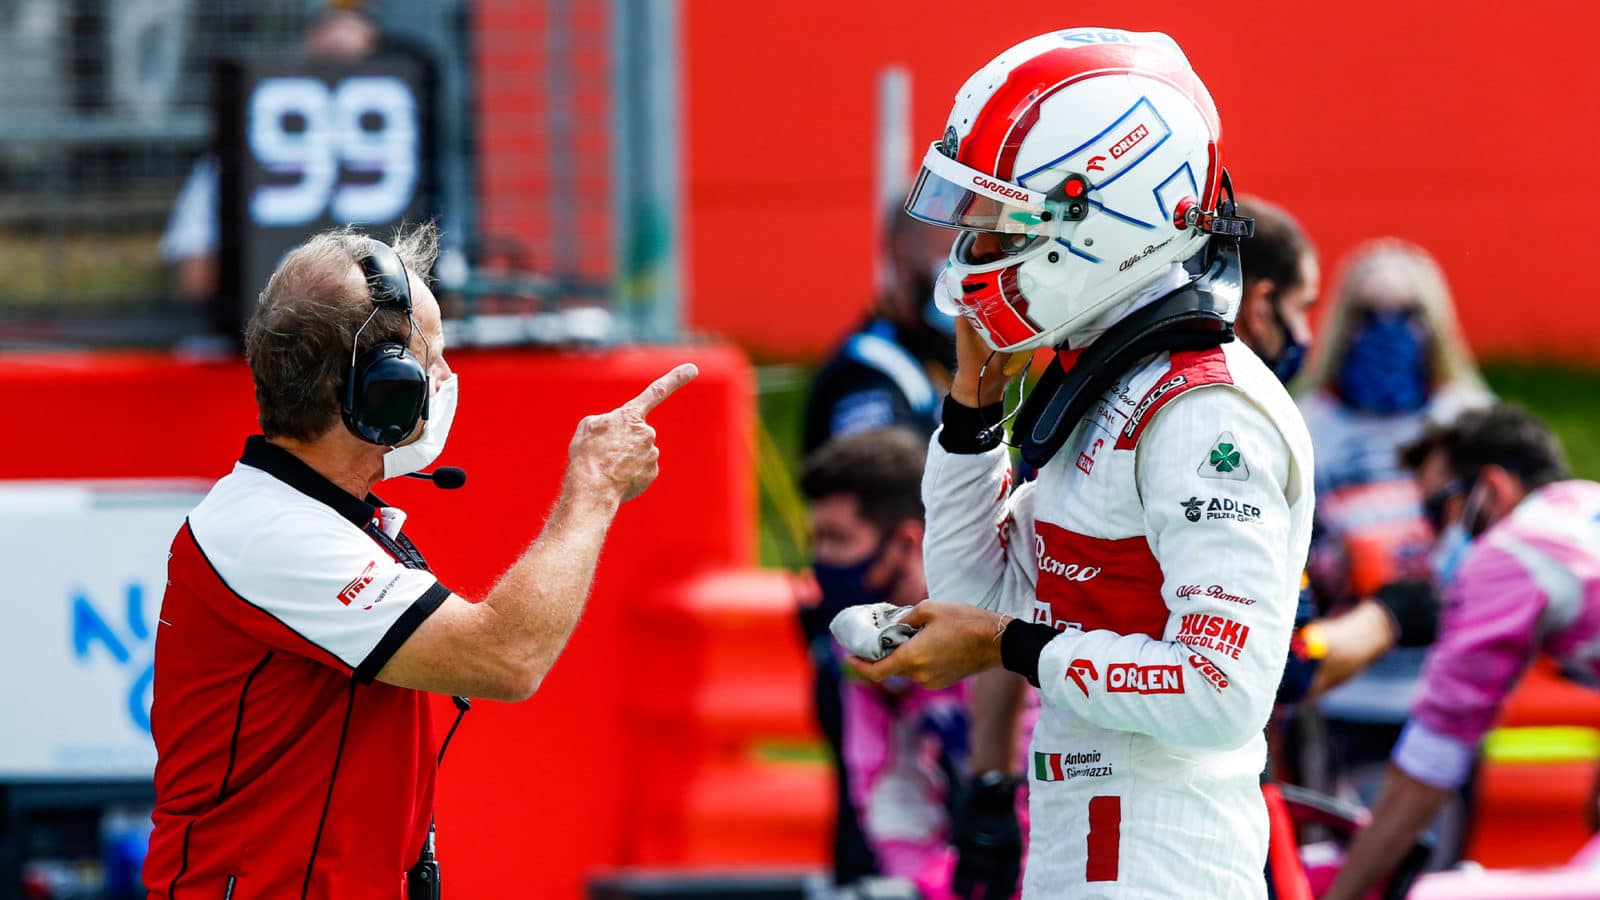 Engineer pointing at Antonio Giovinazzi at Silverstone in 2020